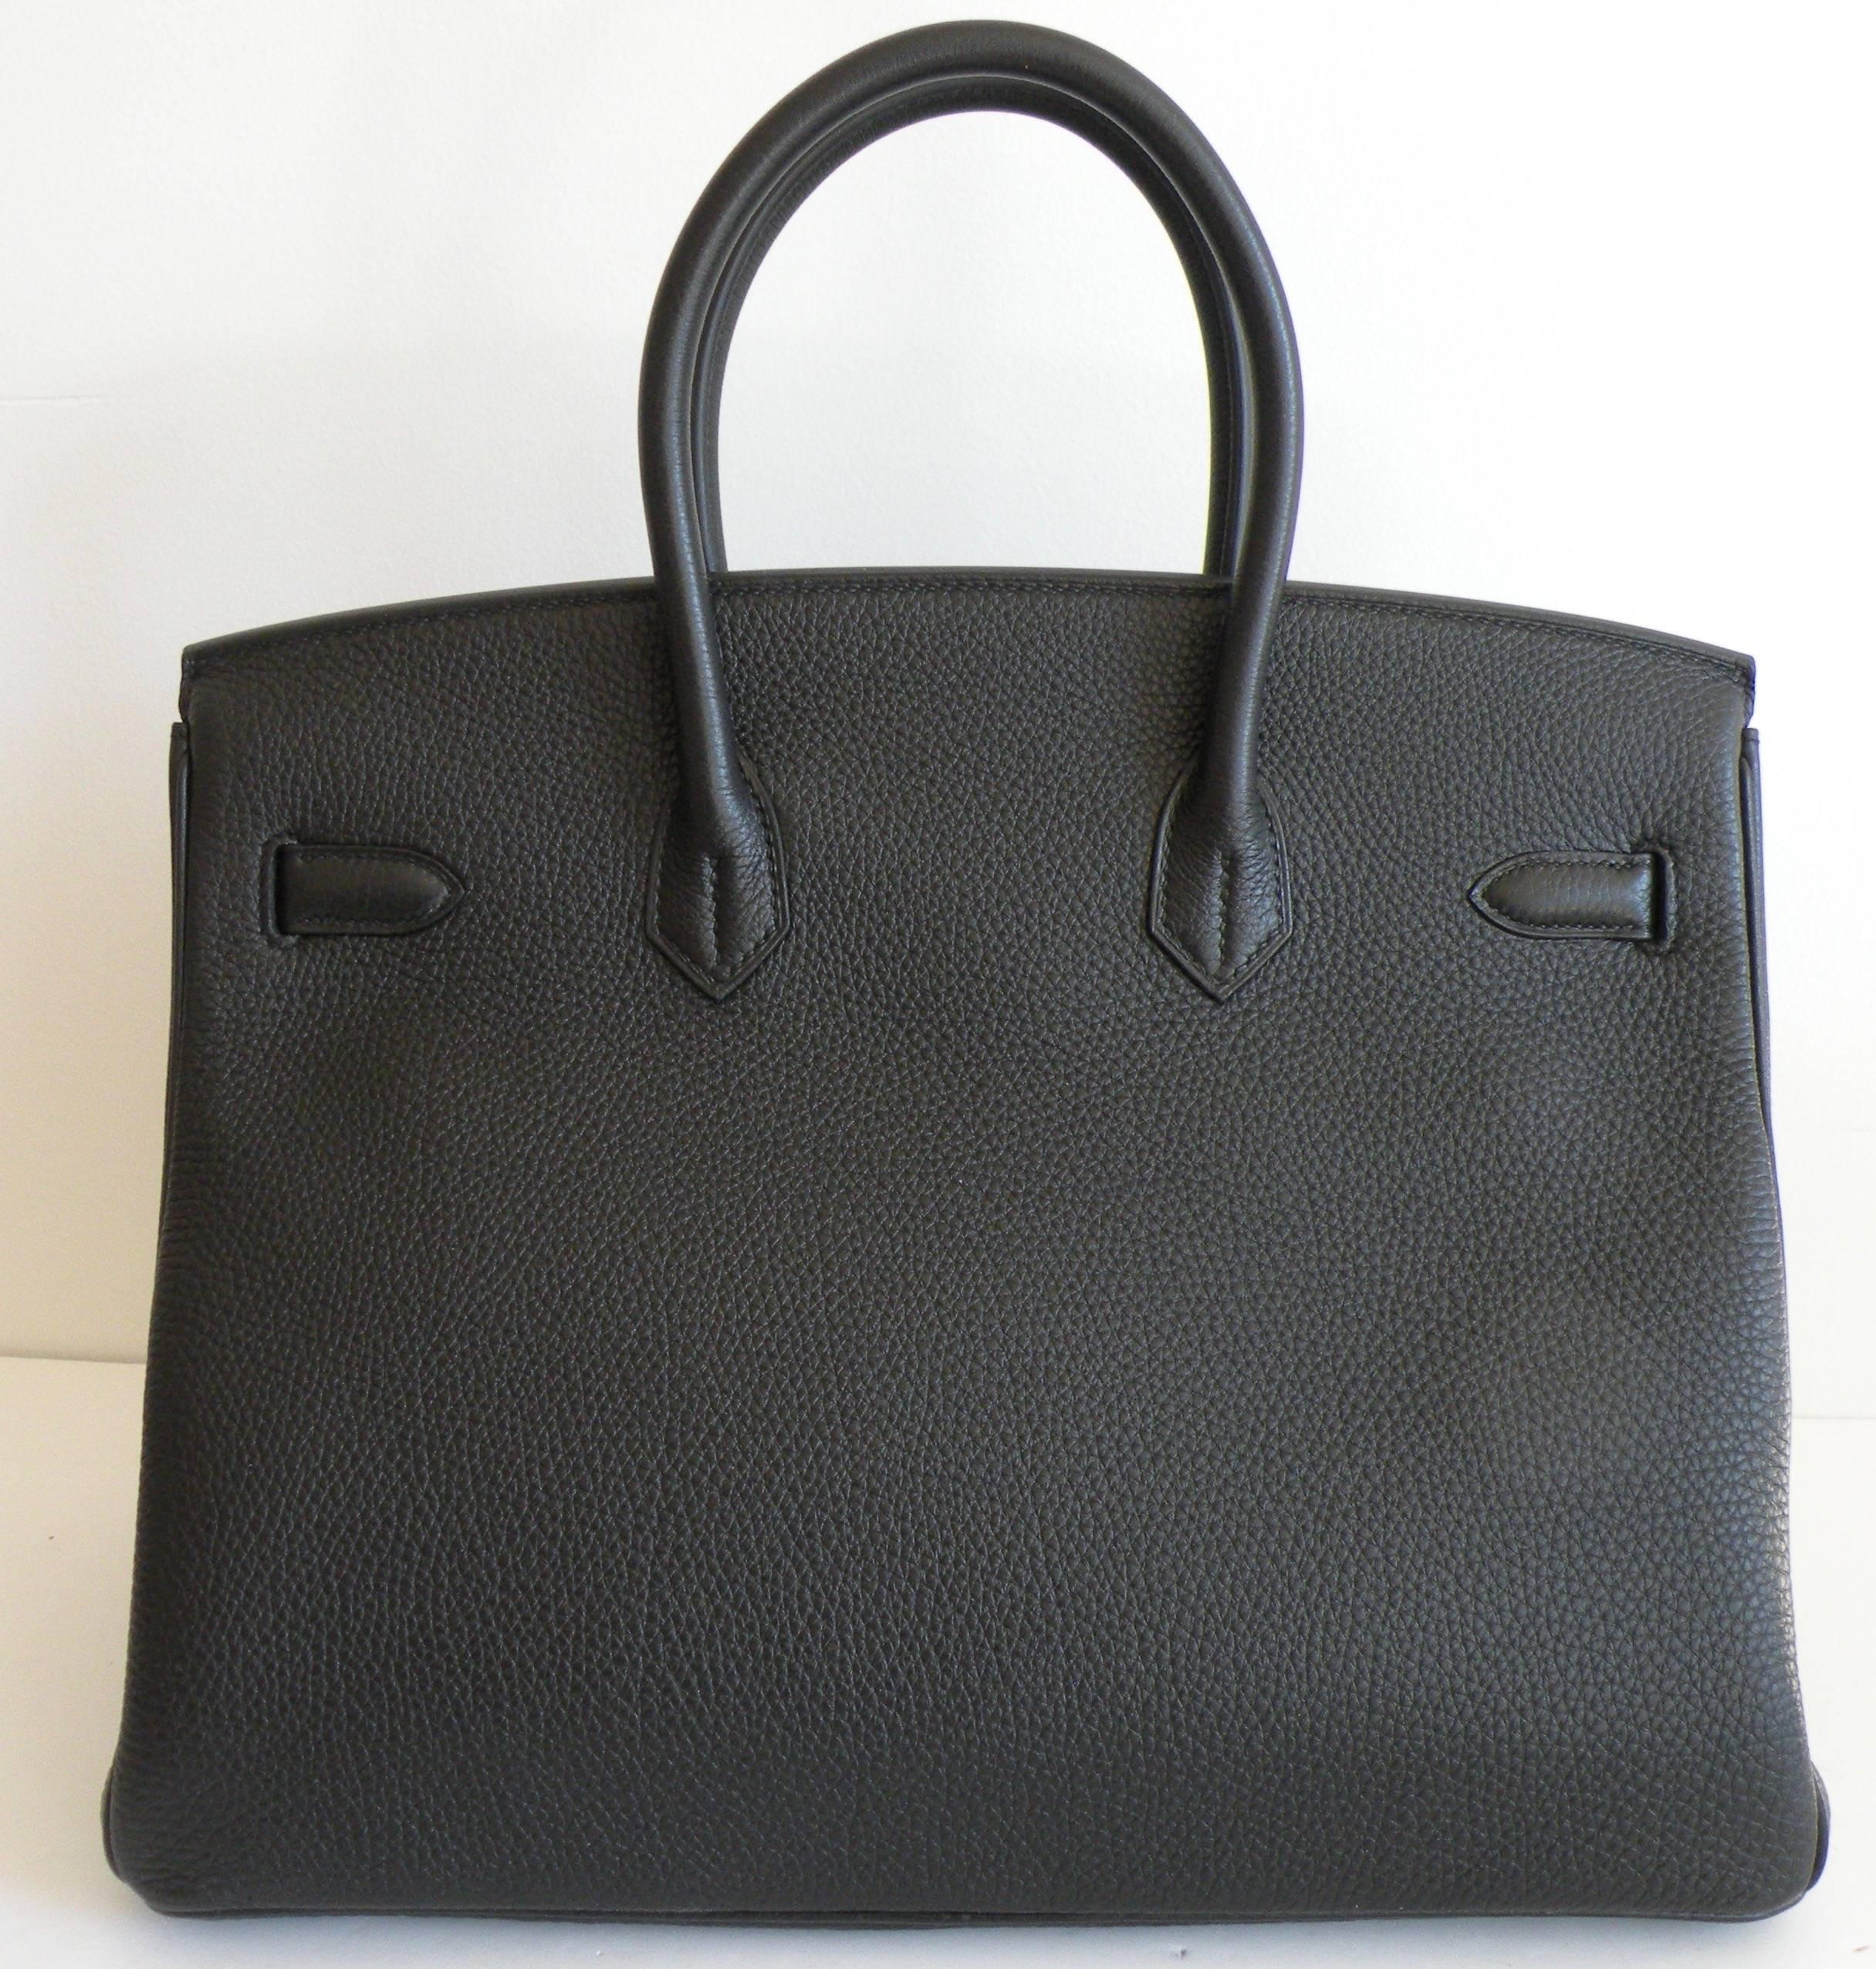 Hermes 35cm Birkin in Black Togo Leather with Palladium Silver Hardware
Togo Leather , the most durable leather.
Such a classic bag.
Black set with Palladium is a stunning combination.
The shape on this bag is gorgeous!
Plastic on the hardware,